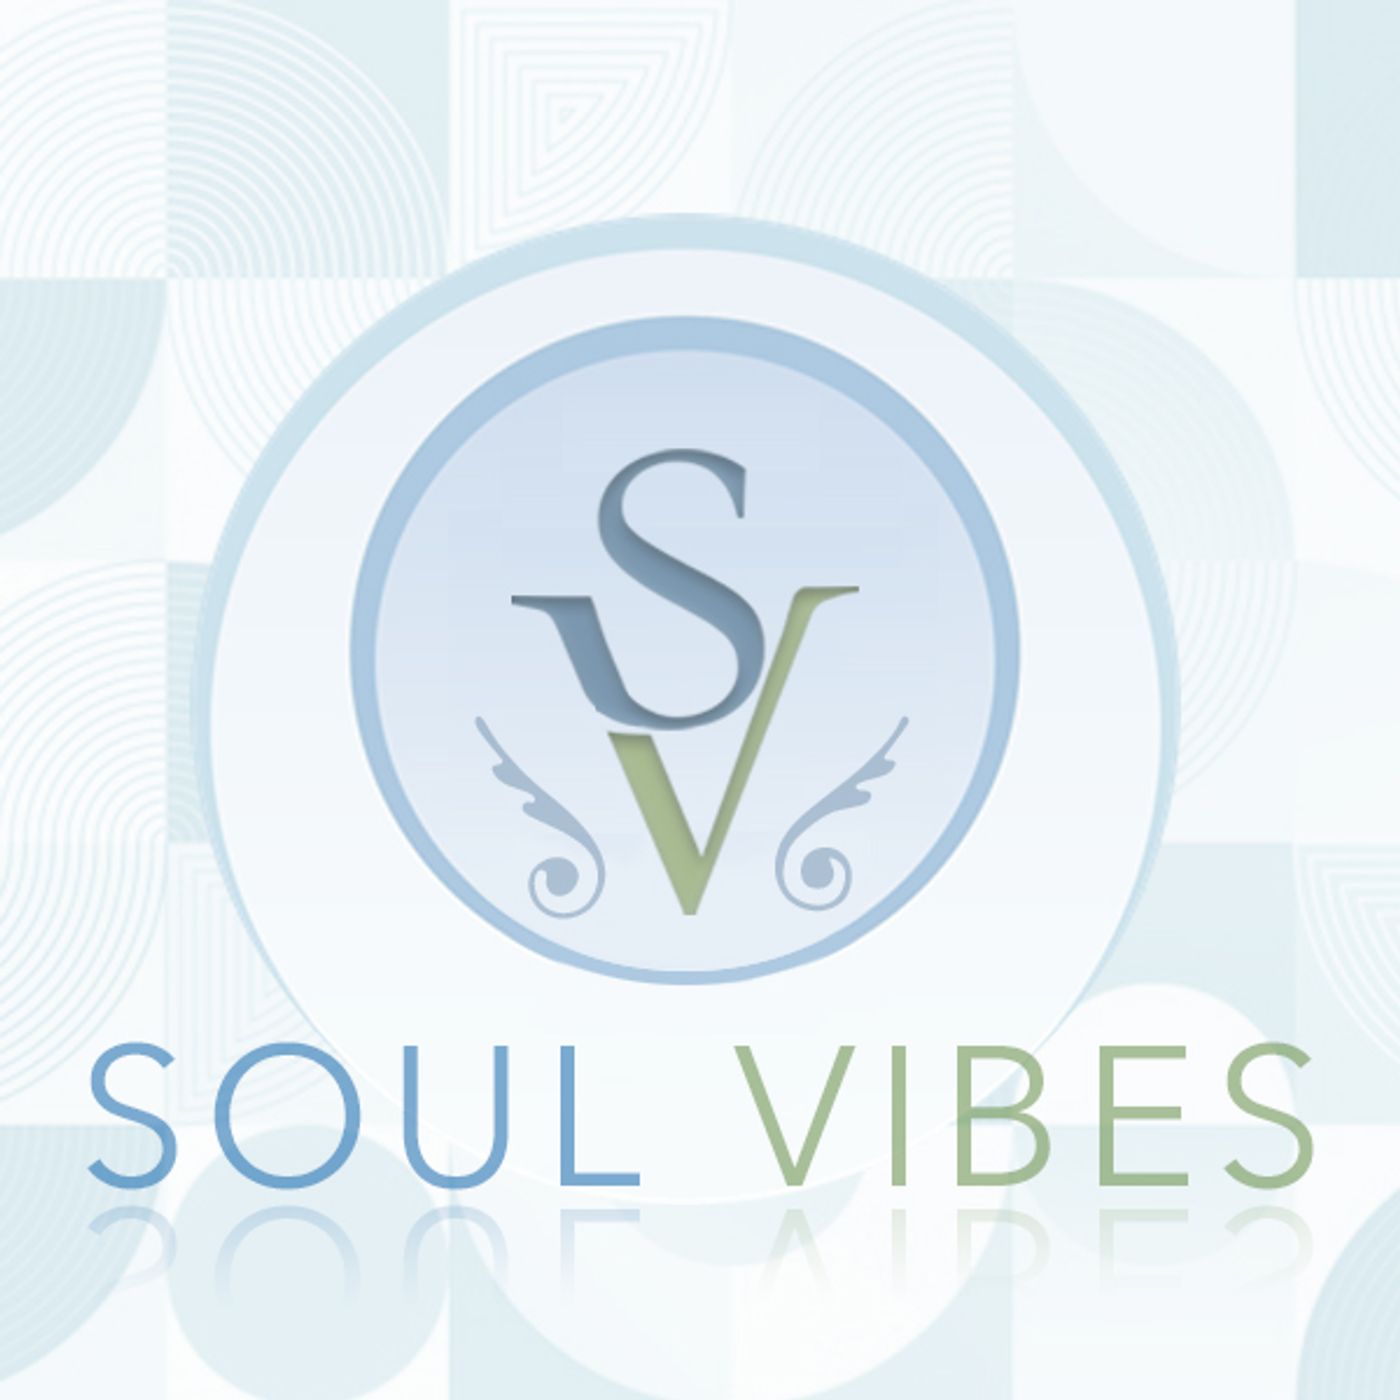 Two Wrongs Don't Make A Right : Soul Vibes